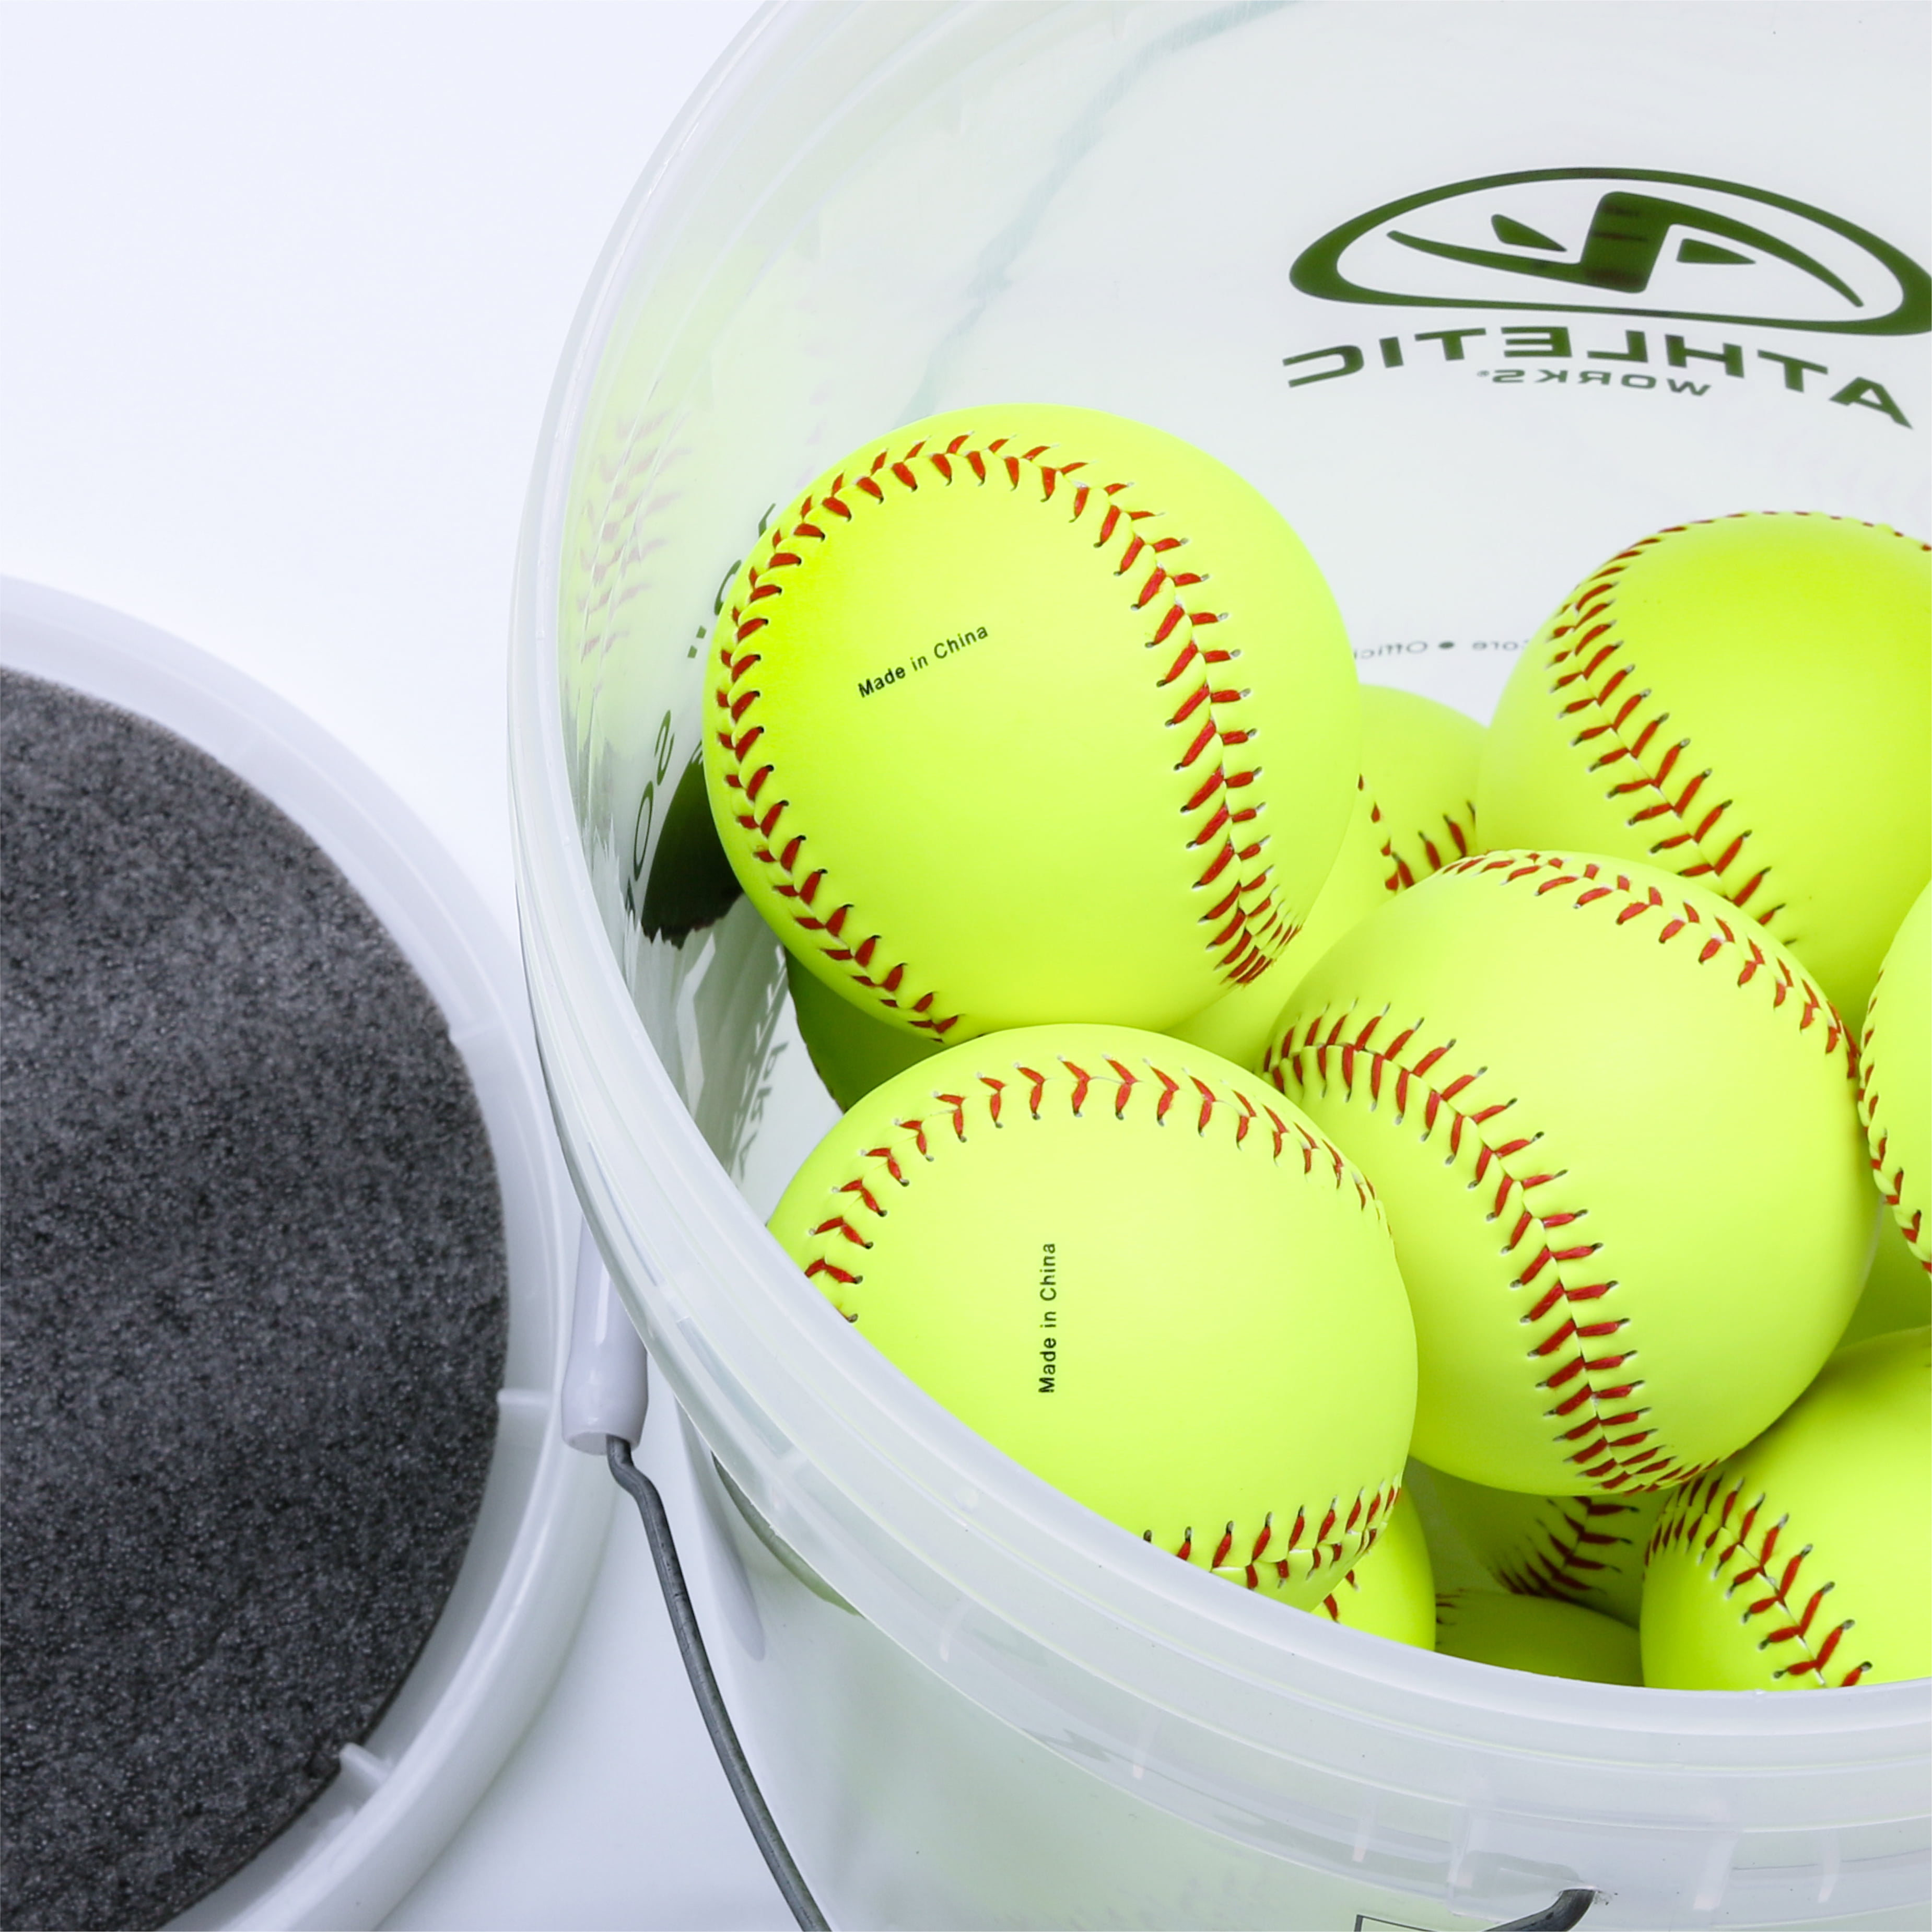 Academy Sports + Outdoors 12 in Fast-Pitch Practice Softballs 18-count  Bucket